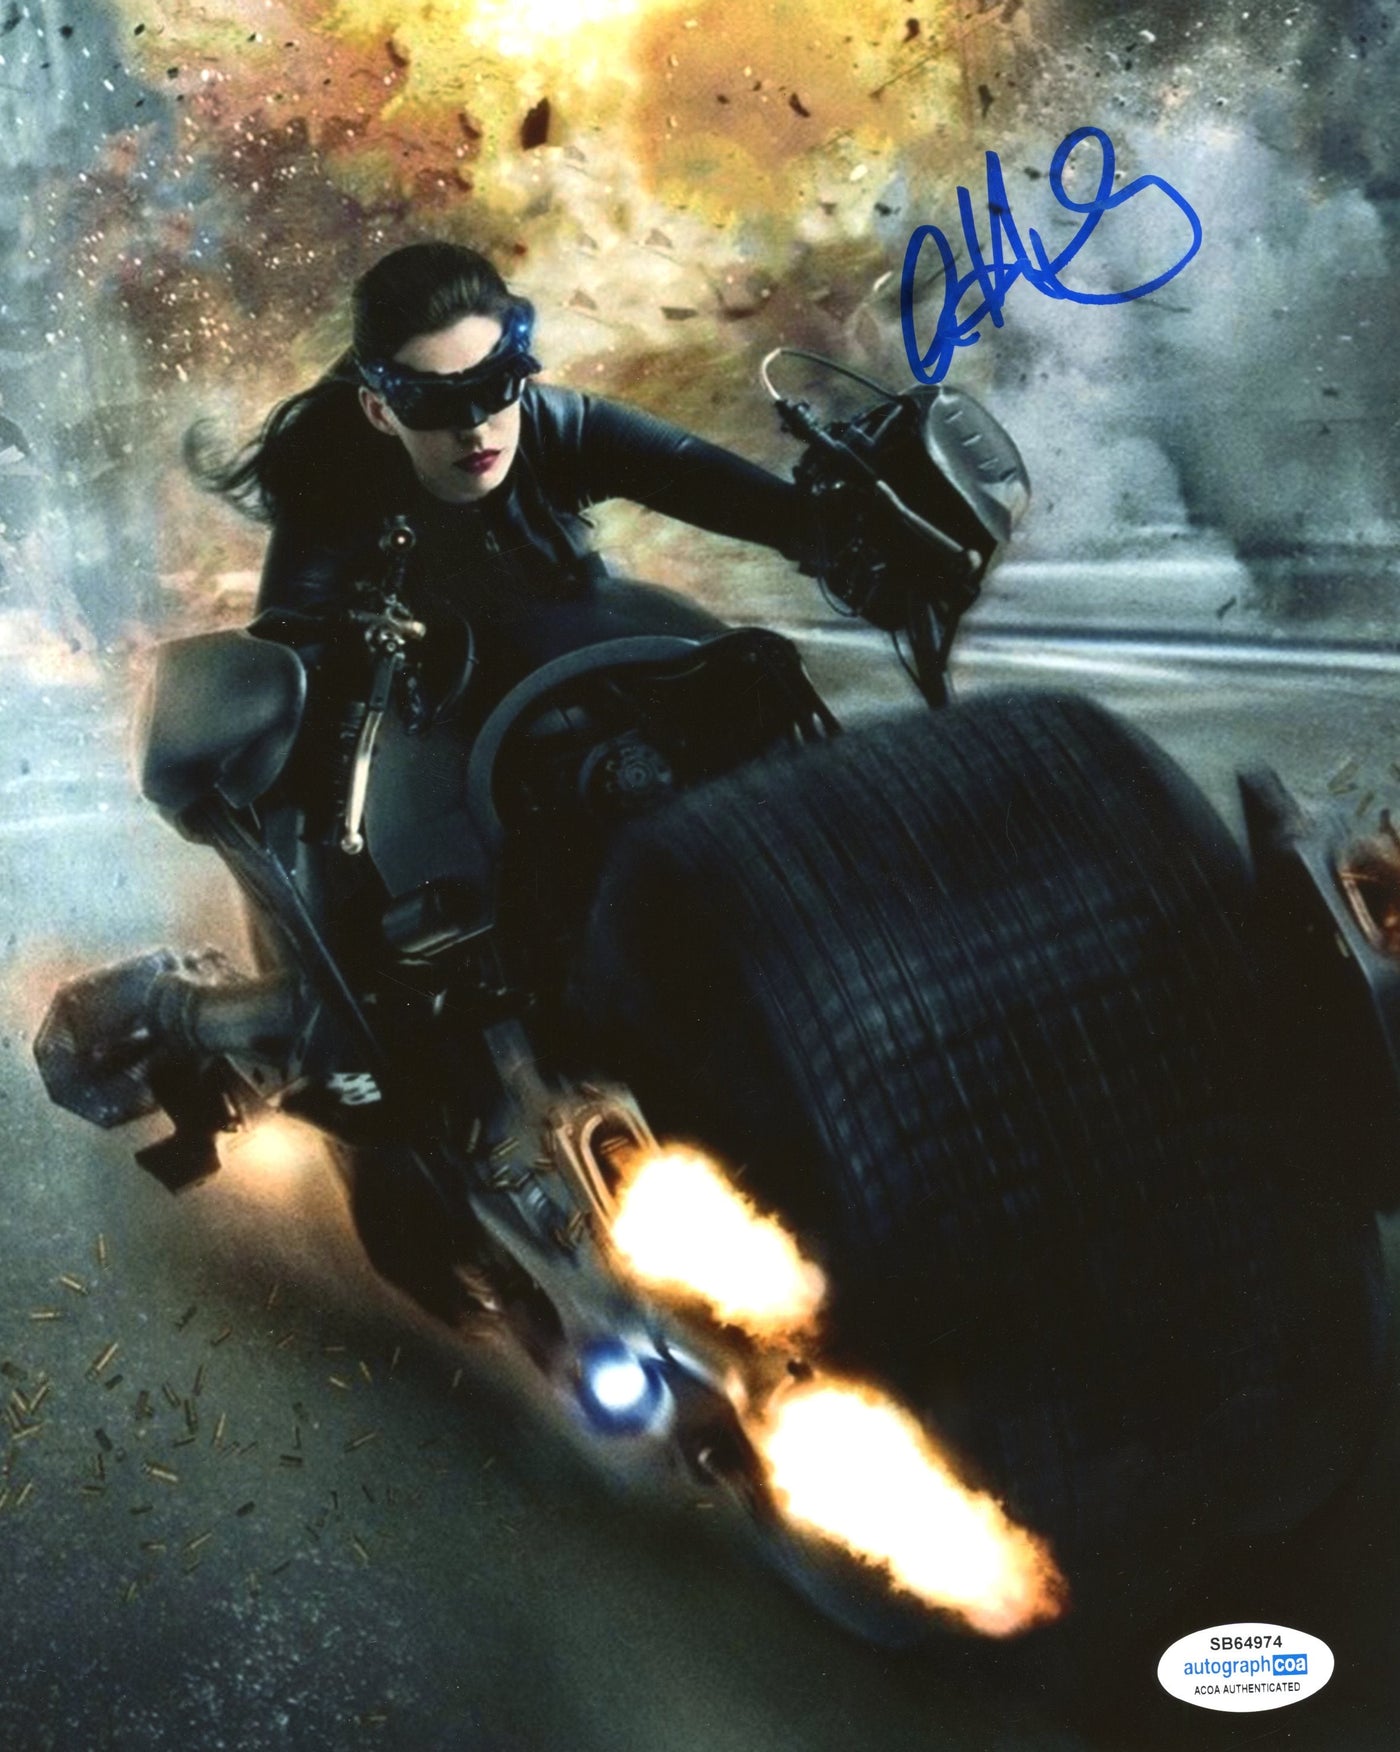 Anne Hathaway Signed 8x10 Photo The Dark Knight Rises Autographed ACOA #1